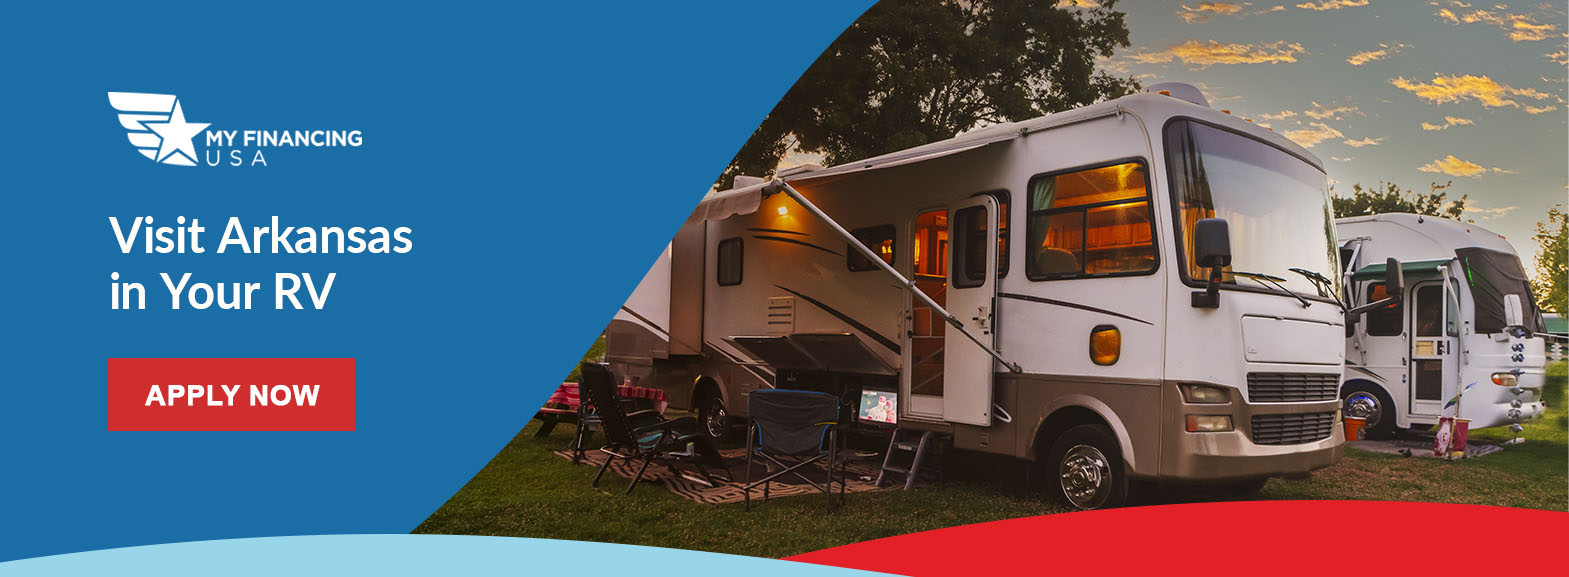 Visit Arkansas in Your RV. Apply now!